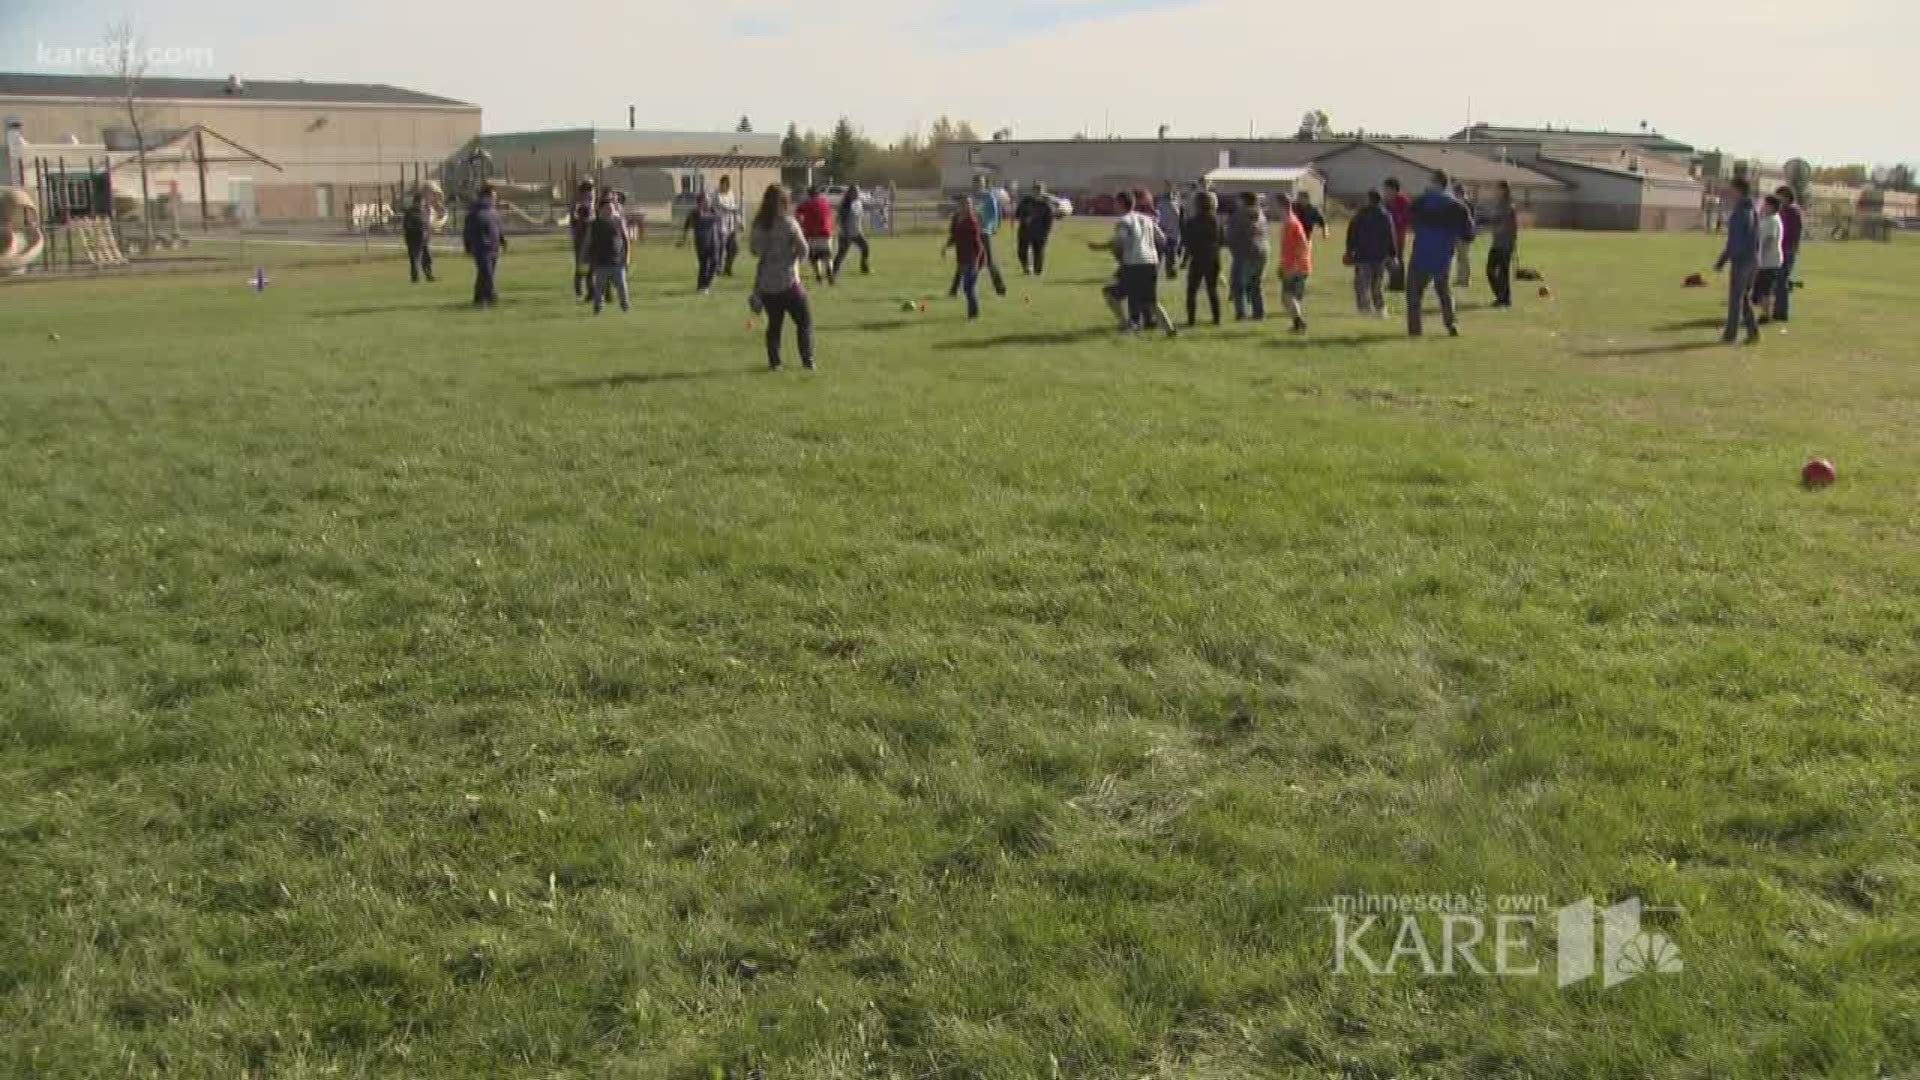 The Minnesota Super Bowl Host Committee Legacy Fund took its campaign to Cloquet on Tuesday. An $85,000 grant will help pay for three new projects for the Fond du Lac Band of Lake Superior Chippewa. http://kare11.tv/2ggZo7D